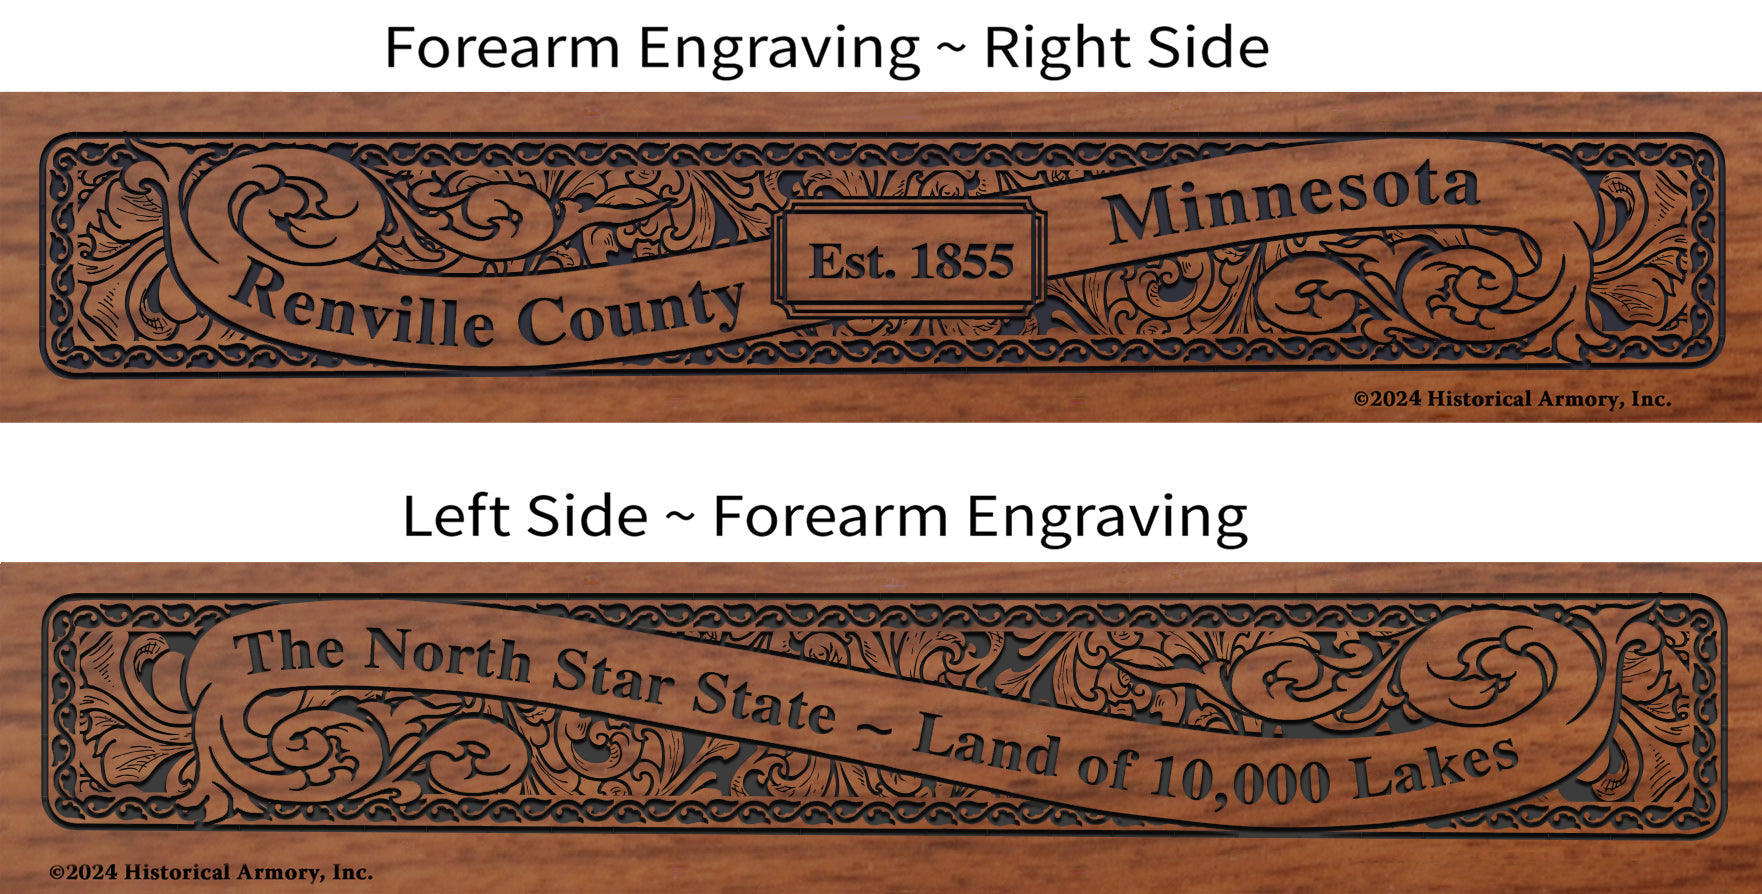 Renville County Minnesota Engraved Rifle Forearm